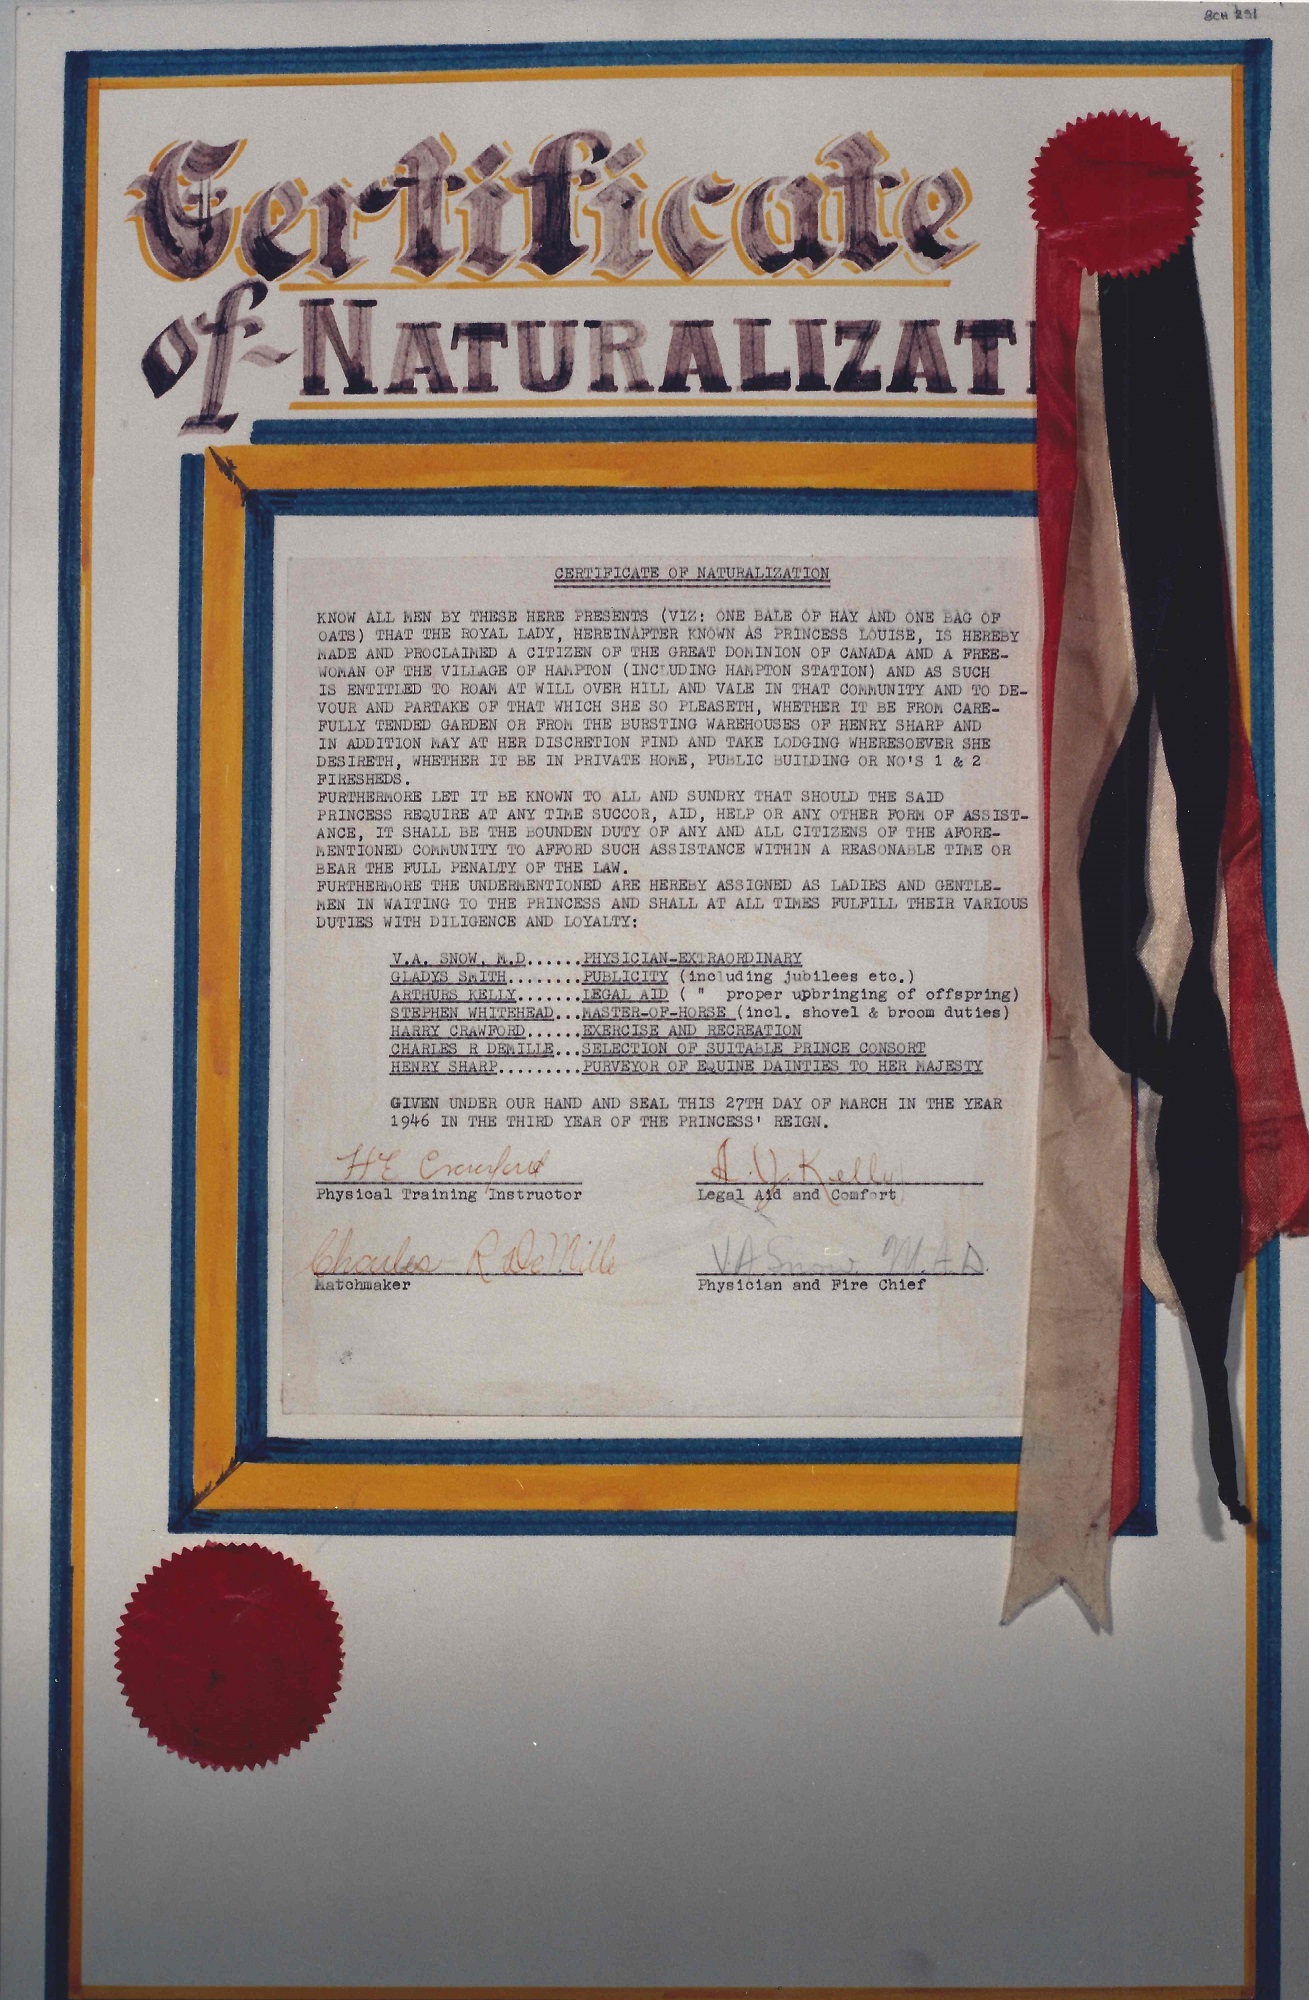 Princes Louise's certificate of naturalization.